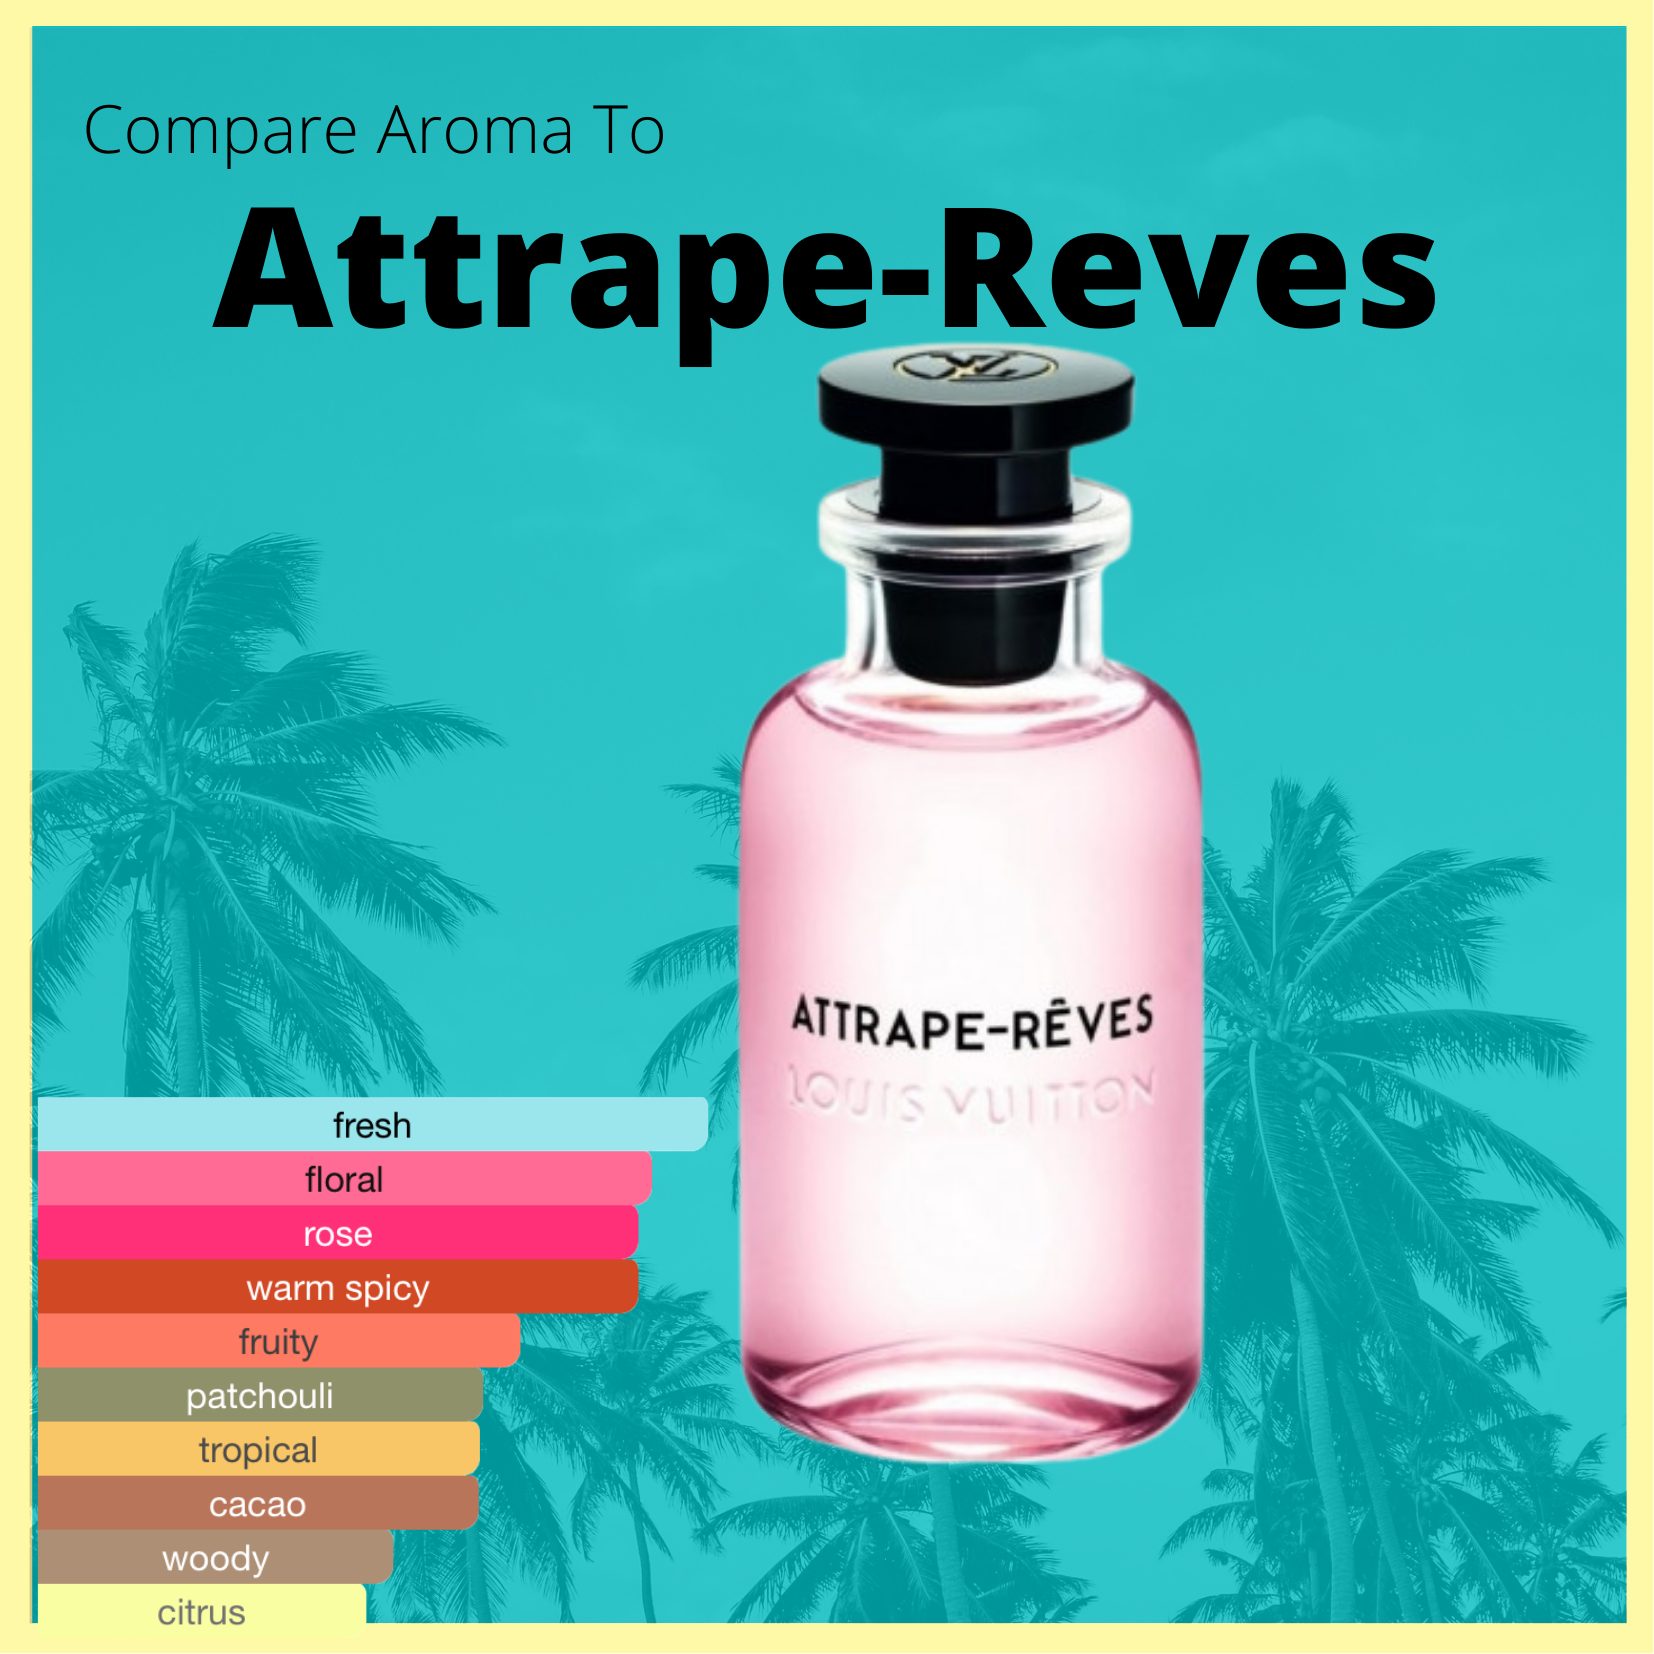 Attrape-Rêves Louis Vuitton Perfume Oil For Women - Concentrated Perfume Oil